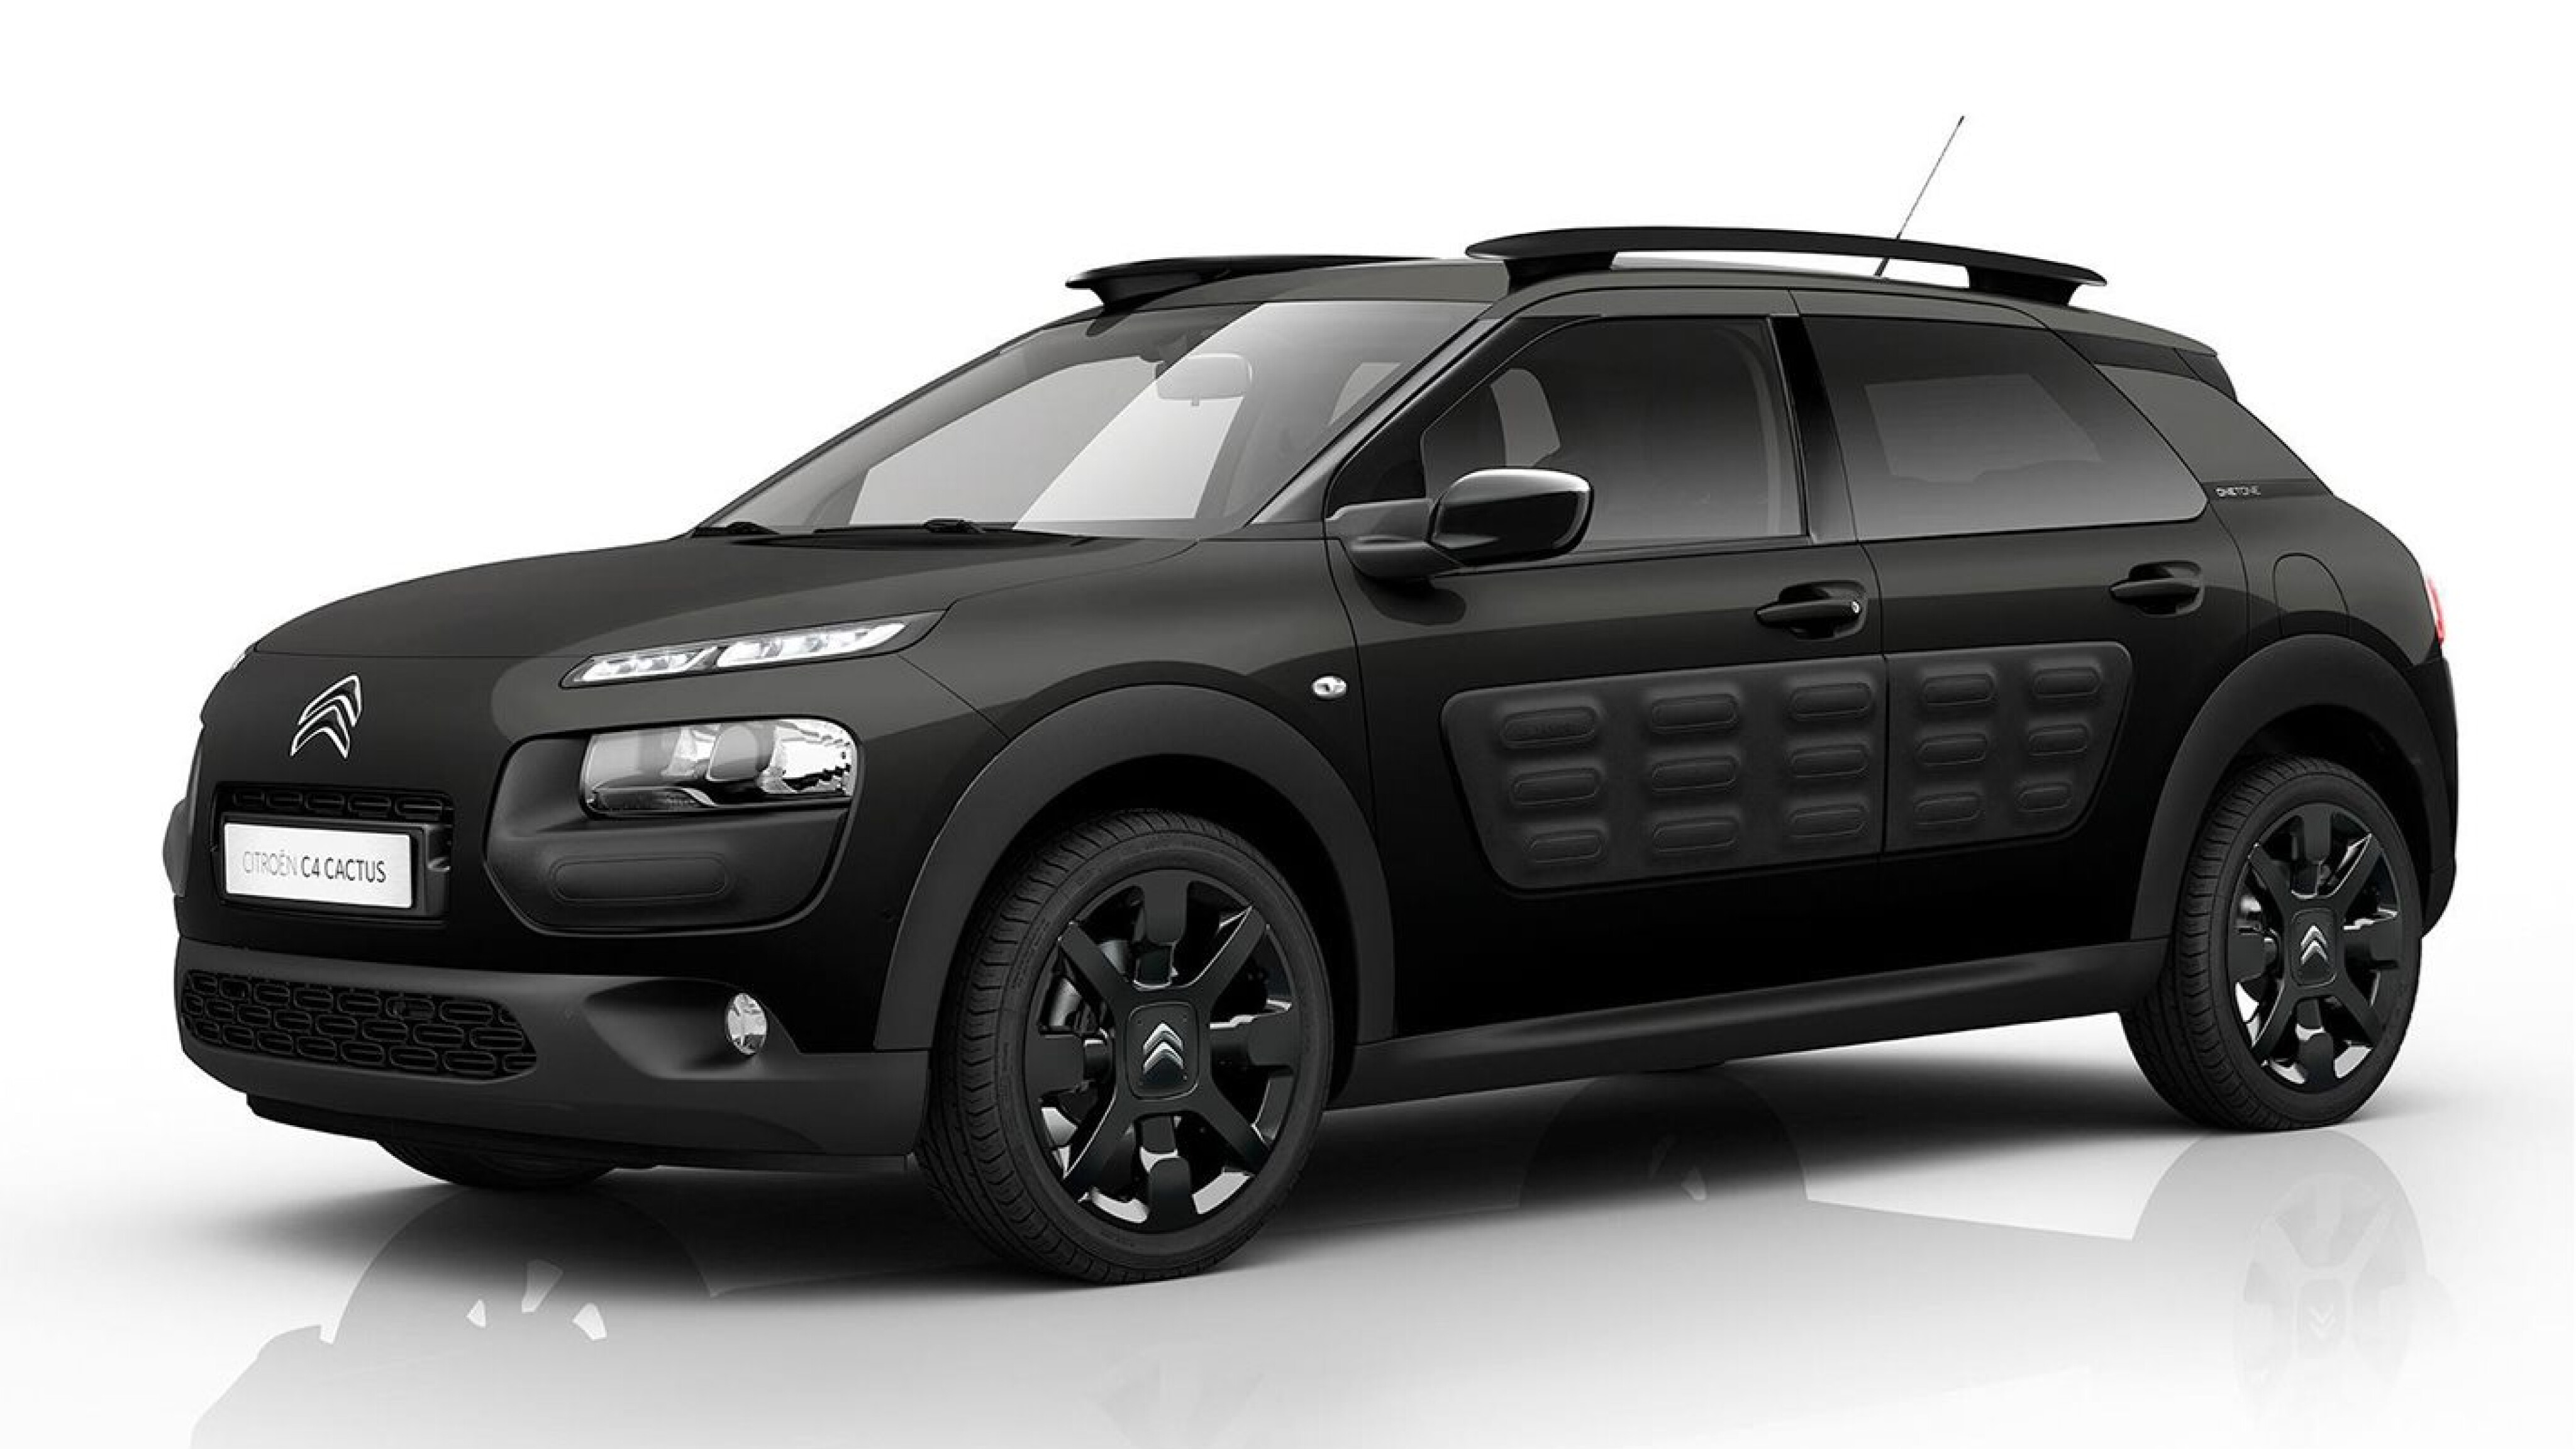 Citroën C4 Cactus Given 'C-Series' Special Edition Treatment For 2020